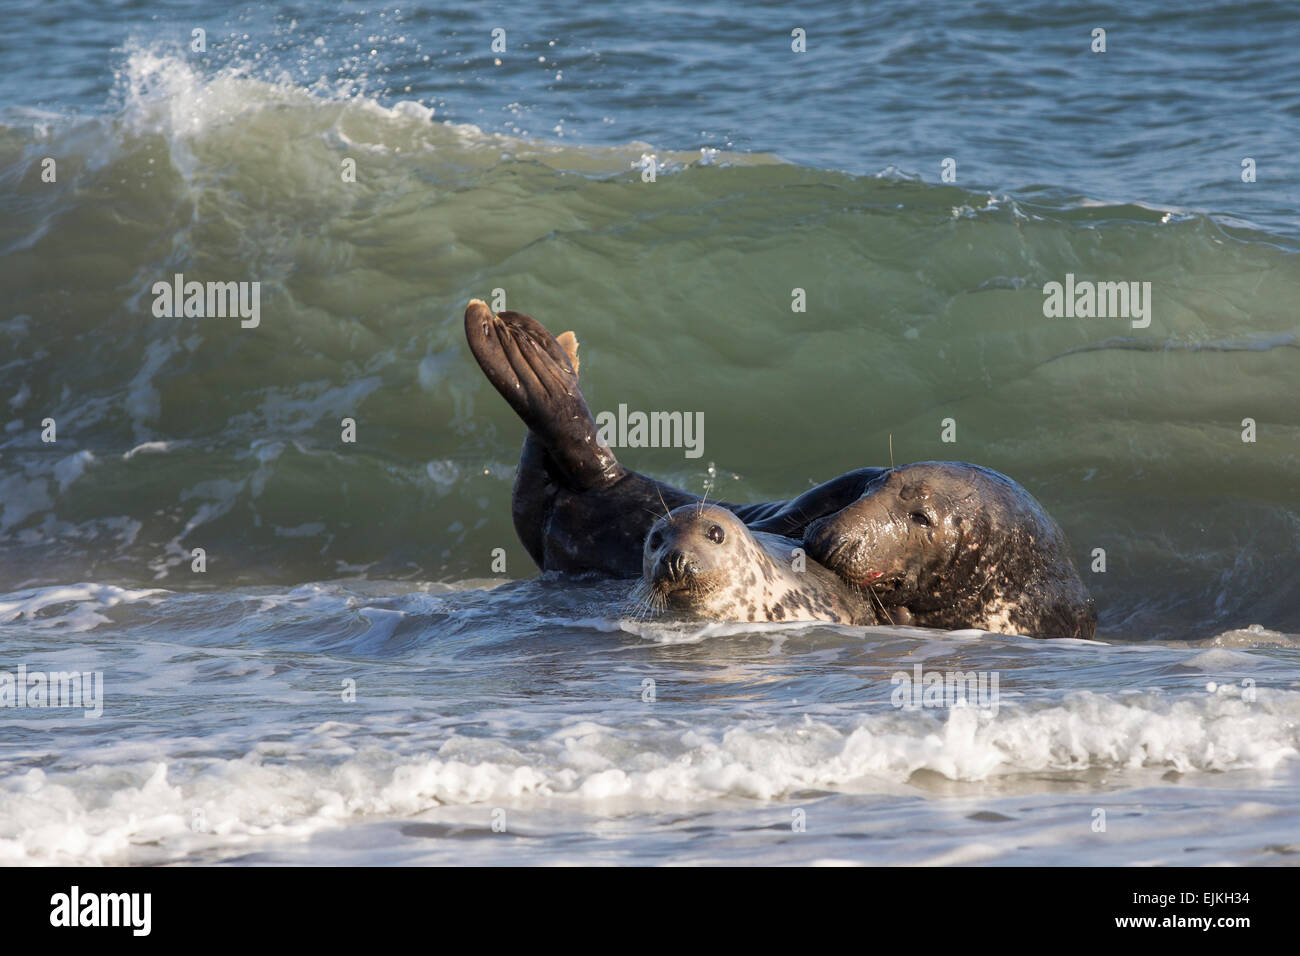 Grey Seal, Kegelrobbe, Halichoerus grypus, Helgoland, pair in the waves Stock Photo